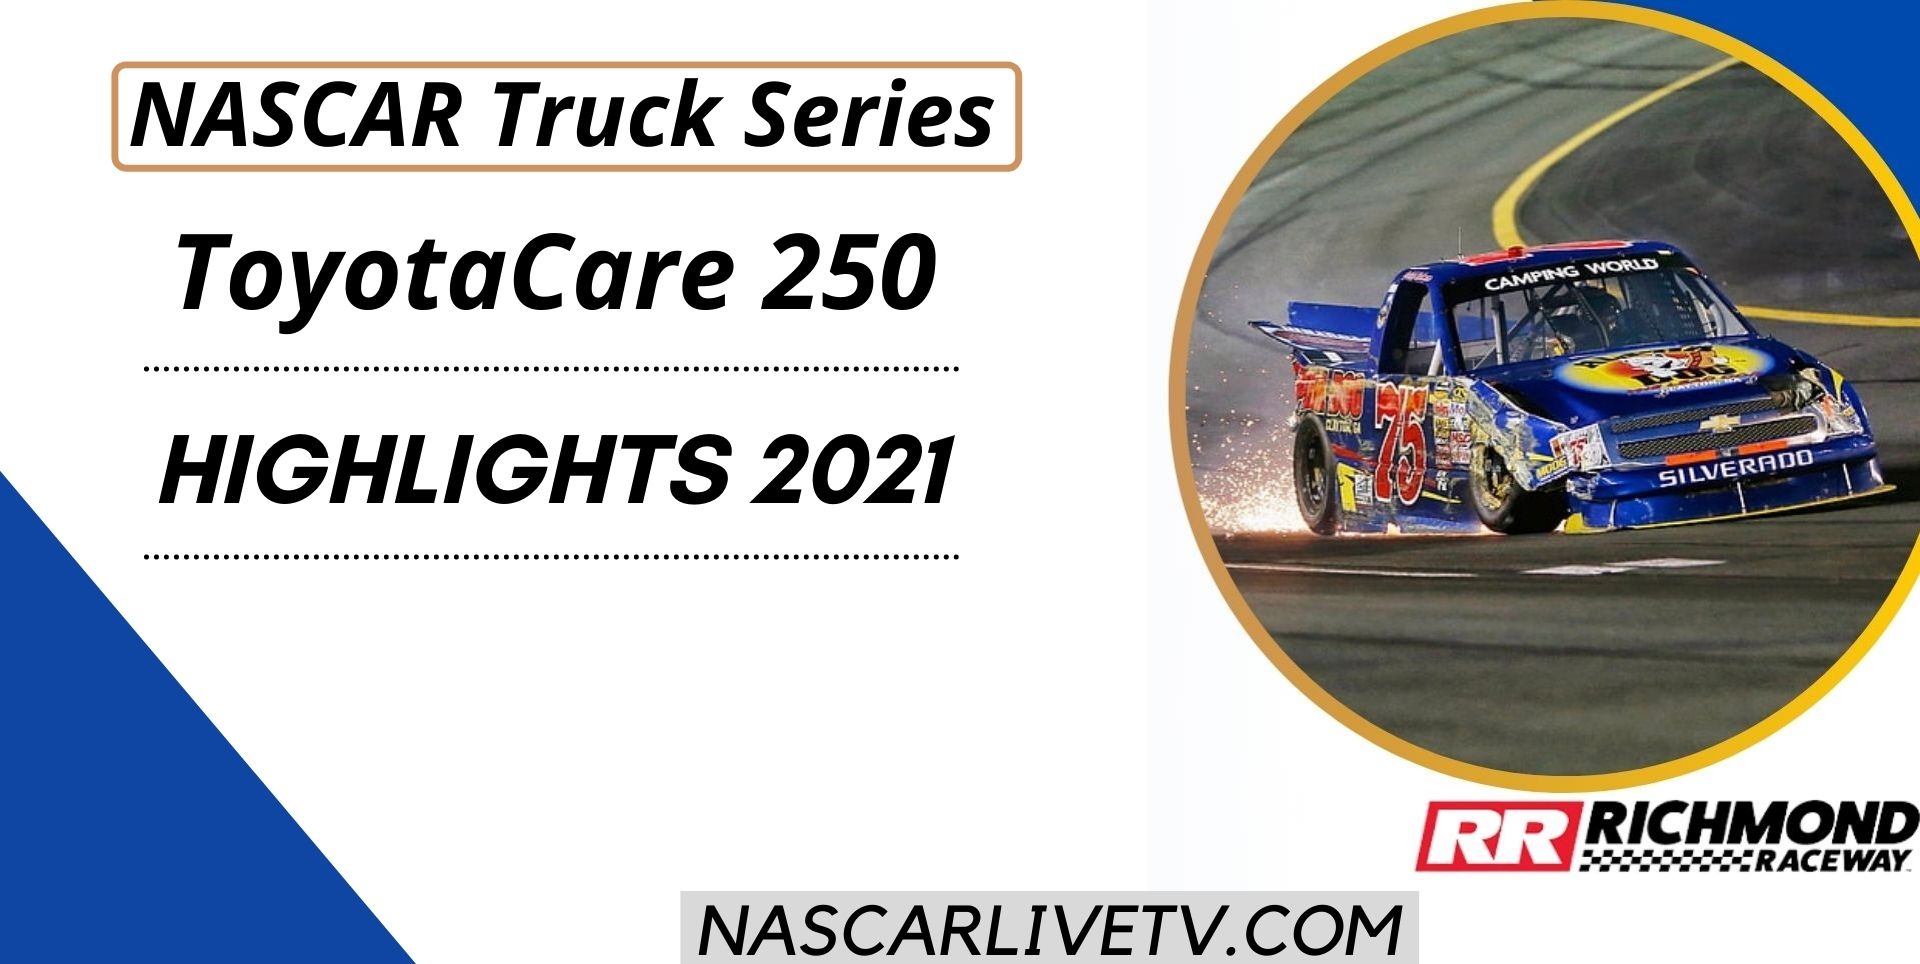 ToyotaCare 250 NASCAR Truck Series Highlights 2021